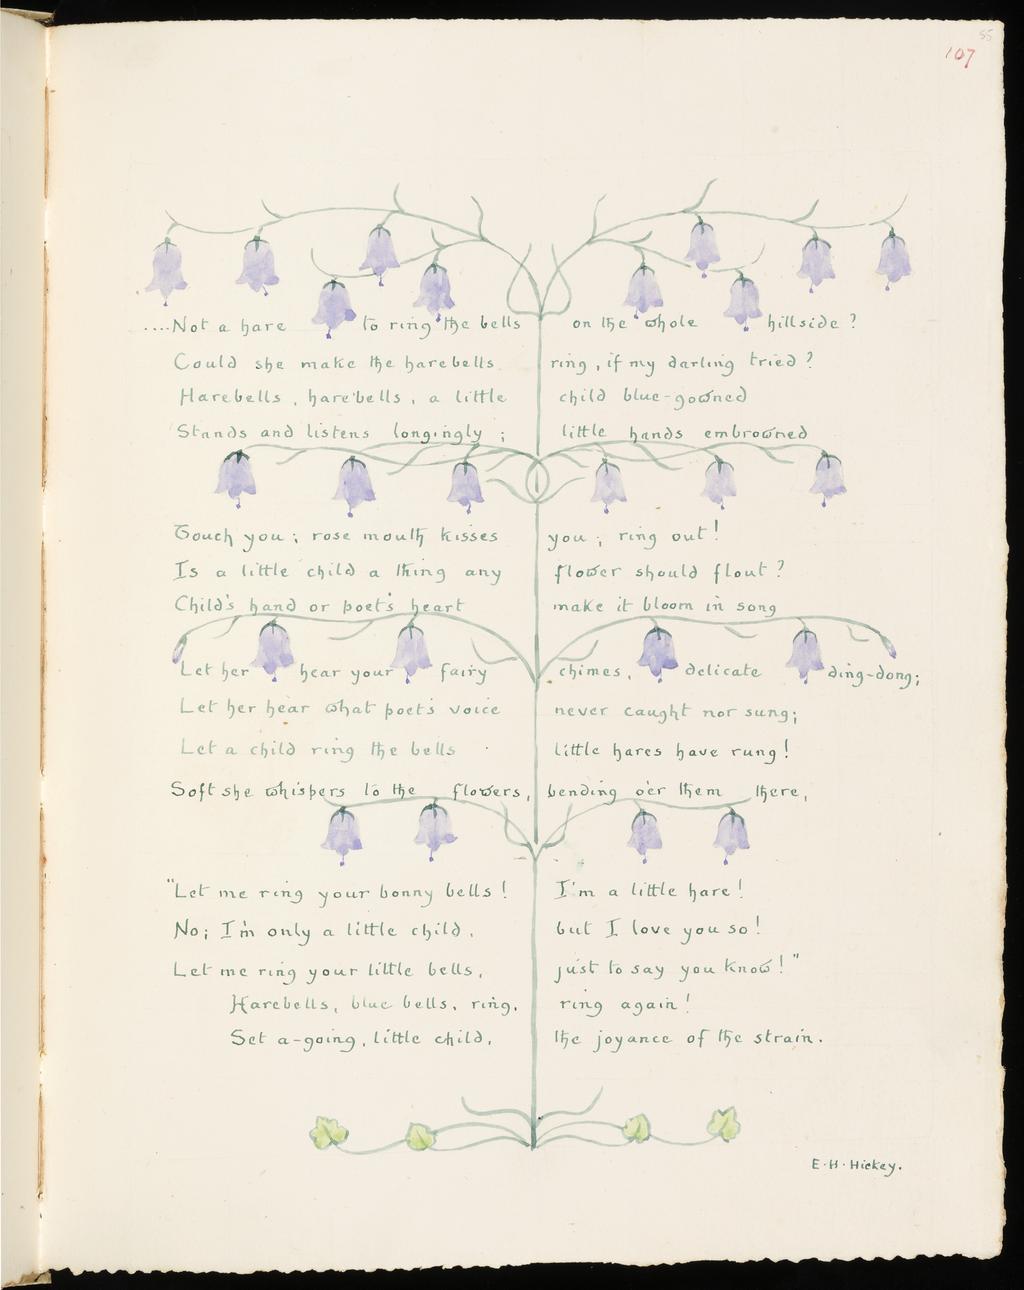 An image of Inscription surrounded by floral border: Harebell. Inscription surrounded by floral border: Rose. Bicknell, Clarence (British, 1842-1918). Watercolour over graphite on paper, height, leaf, 326  mm, width, leaf, 255 mm, 1908. Part of: A Posy. Vellum-bound sketchbook containing leaves with an index at the end. Cover with brown leather ornamentation and remains of vellum closure straps.  Inscription(s): Recto, upper right; watercolour; 107. Recto; watercolour; ....Not a hare to right the bells / Could she make the harebells / Harebells, harebells, a little / Stands and listens longingly; / Touch you; rose mouth kisses / Is a little child a thing any Child's hand or poet's heart / Let her hear your fairy / Let her hear what poet's voice / Let a child ring the bells / Soft she whispers to the flowers, / "Let me ring your bonny bells! / No; I'm only a little child, / Let me ring your little bells, / Harebells, blue bells, ring, / Set a-going, little child, / on the whole hillside? / ring, if my darling tried? / child blue-gowned / little hands embrowned / you; ring out! / flower should flout? / make it bloom in song / chimes, delicate ding-dong; / never caught nor sung; / little hares have rung! / bending o'er them there, / I'm a little hare! / but I love you so! / just to say you know!" / ring again! / the joyance of the strain. / E.H. Hickey.; two vertical columns, column break following 'Set a-going, little child'. Verso; watercolour; And the wild-Roses of the promontory / Around me shuddered in the wind, and shed / Their petals of pale red. / There was an old belief that in the embers / Of all things their primordial form exists, / And cunning alchemists / Could recreate the Rose with all its members / From its own ashes, but without the bloom, / Without the lost perfume, / Ah me! what wonder-working, occult science / Can from the ashes in our hearts once more / The Rose of youth restore? / Longfellow / Palingenesis. / And the rose, like a nymph to the bath addressed